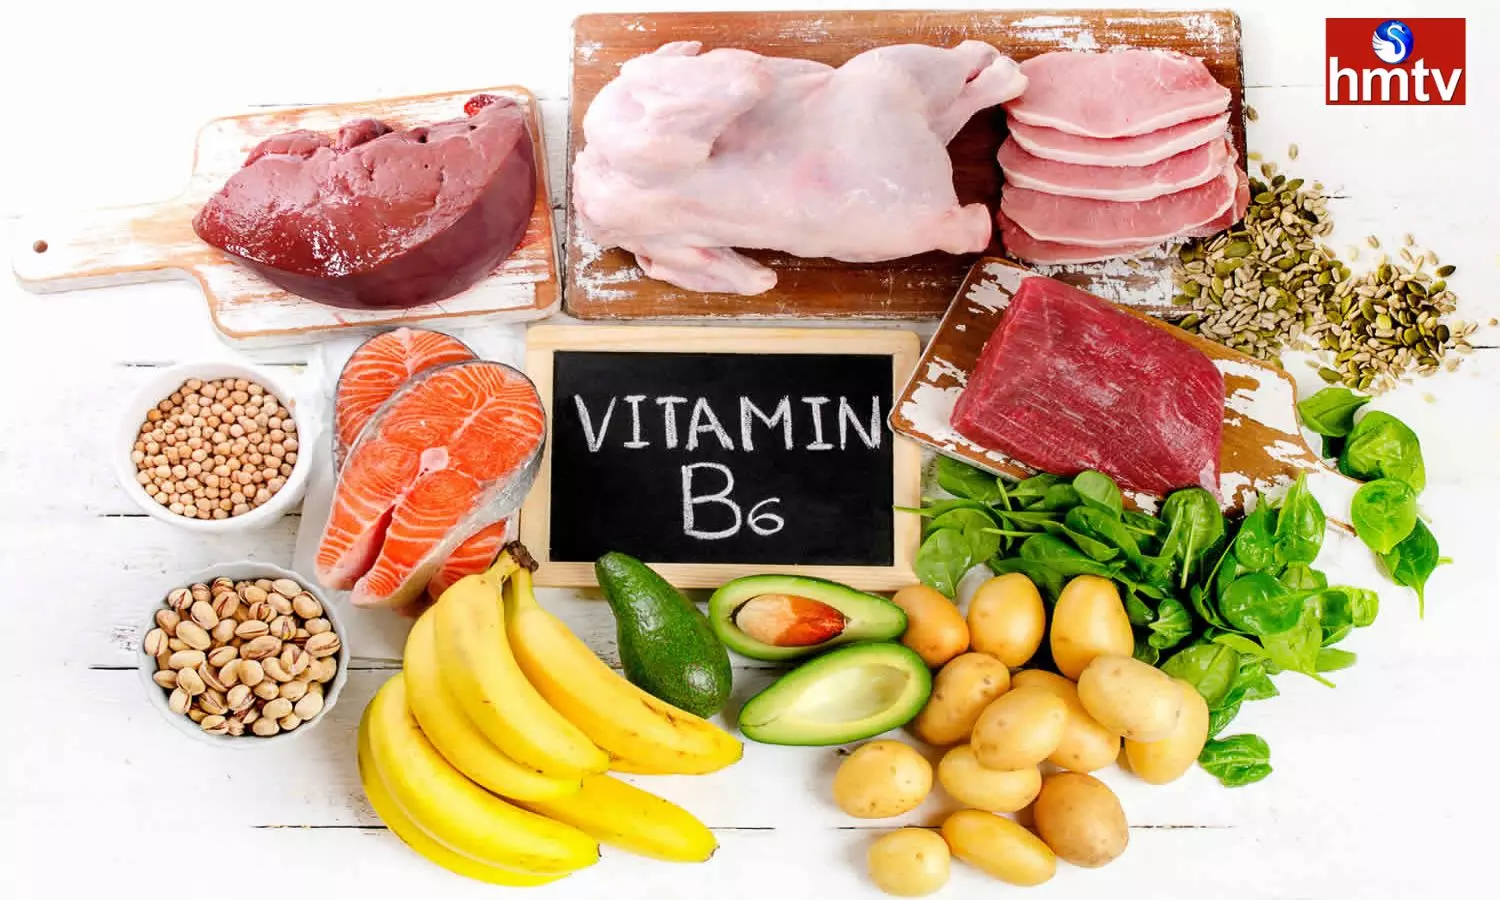 Deficiency Of Vitamin B6 Is Very Dangerous Eat These Often To Avoid